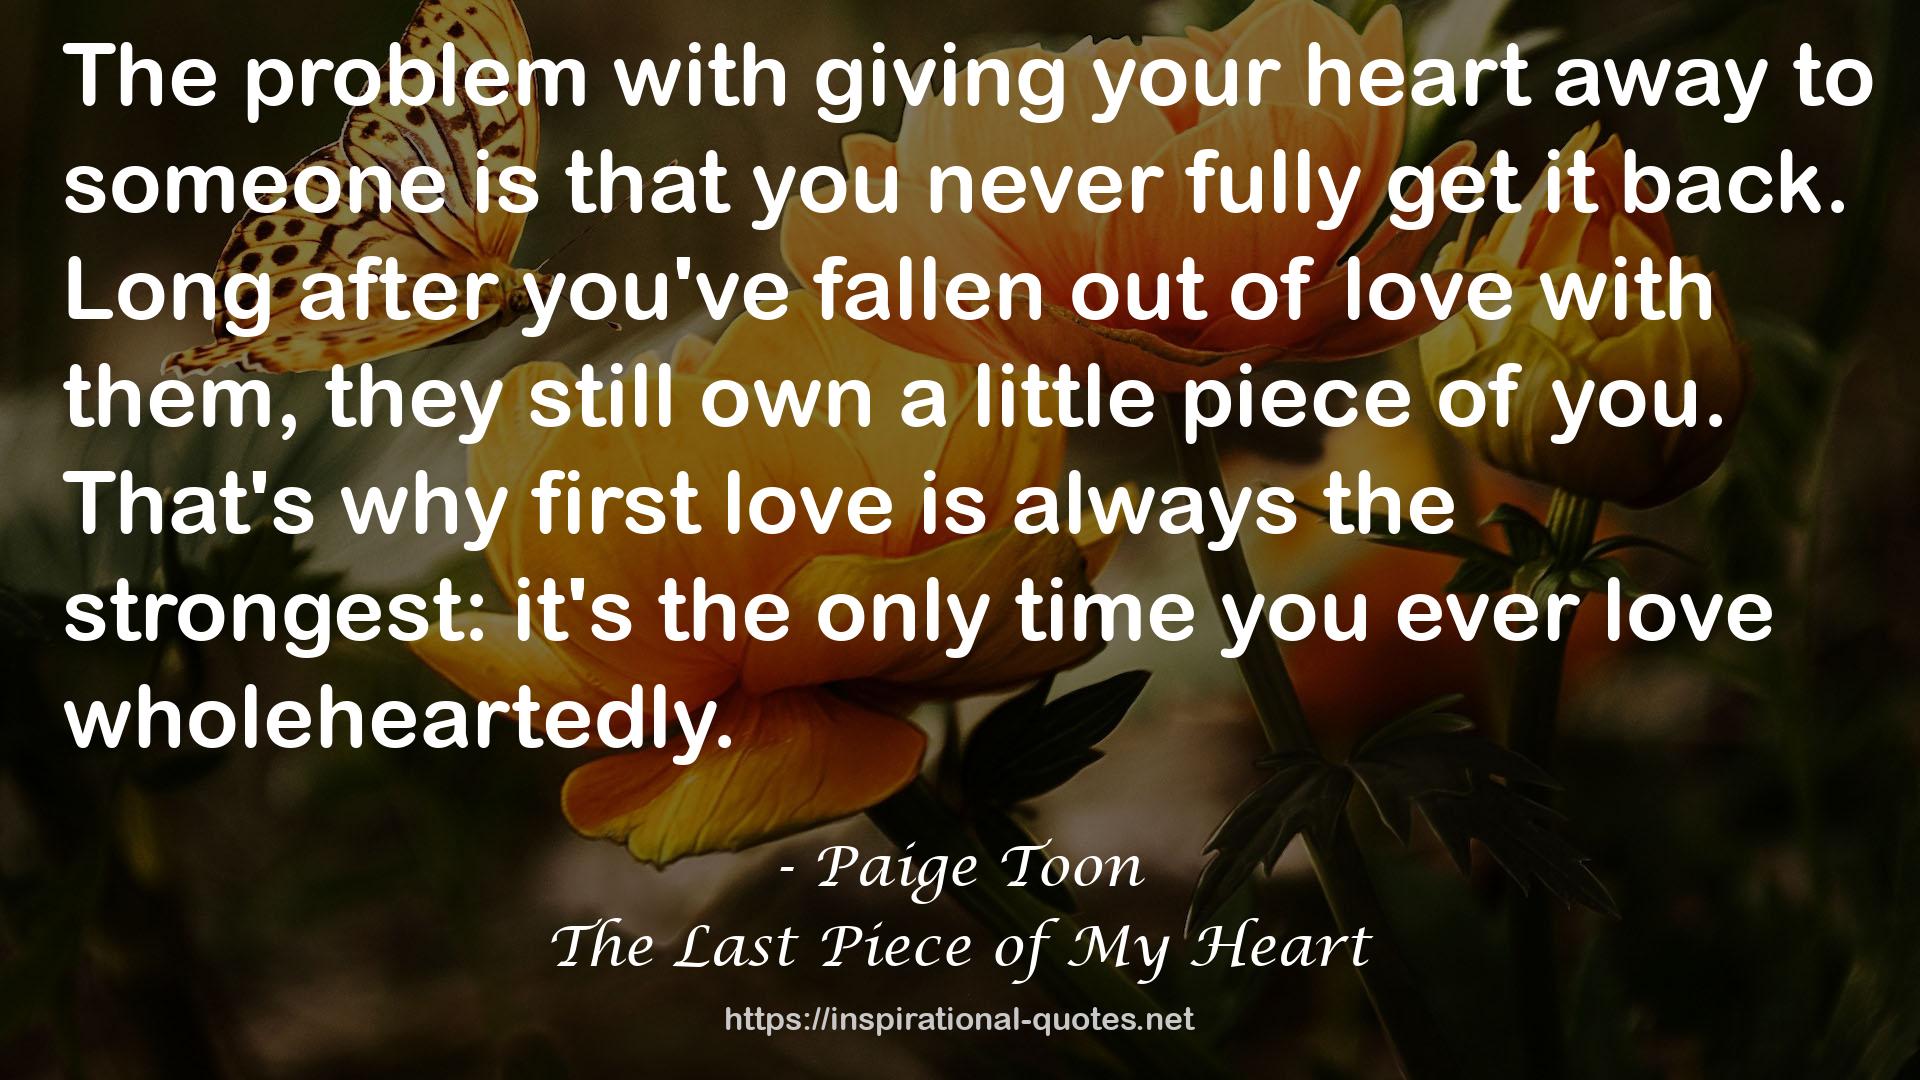 The Last Piece of My Heart QUOTES